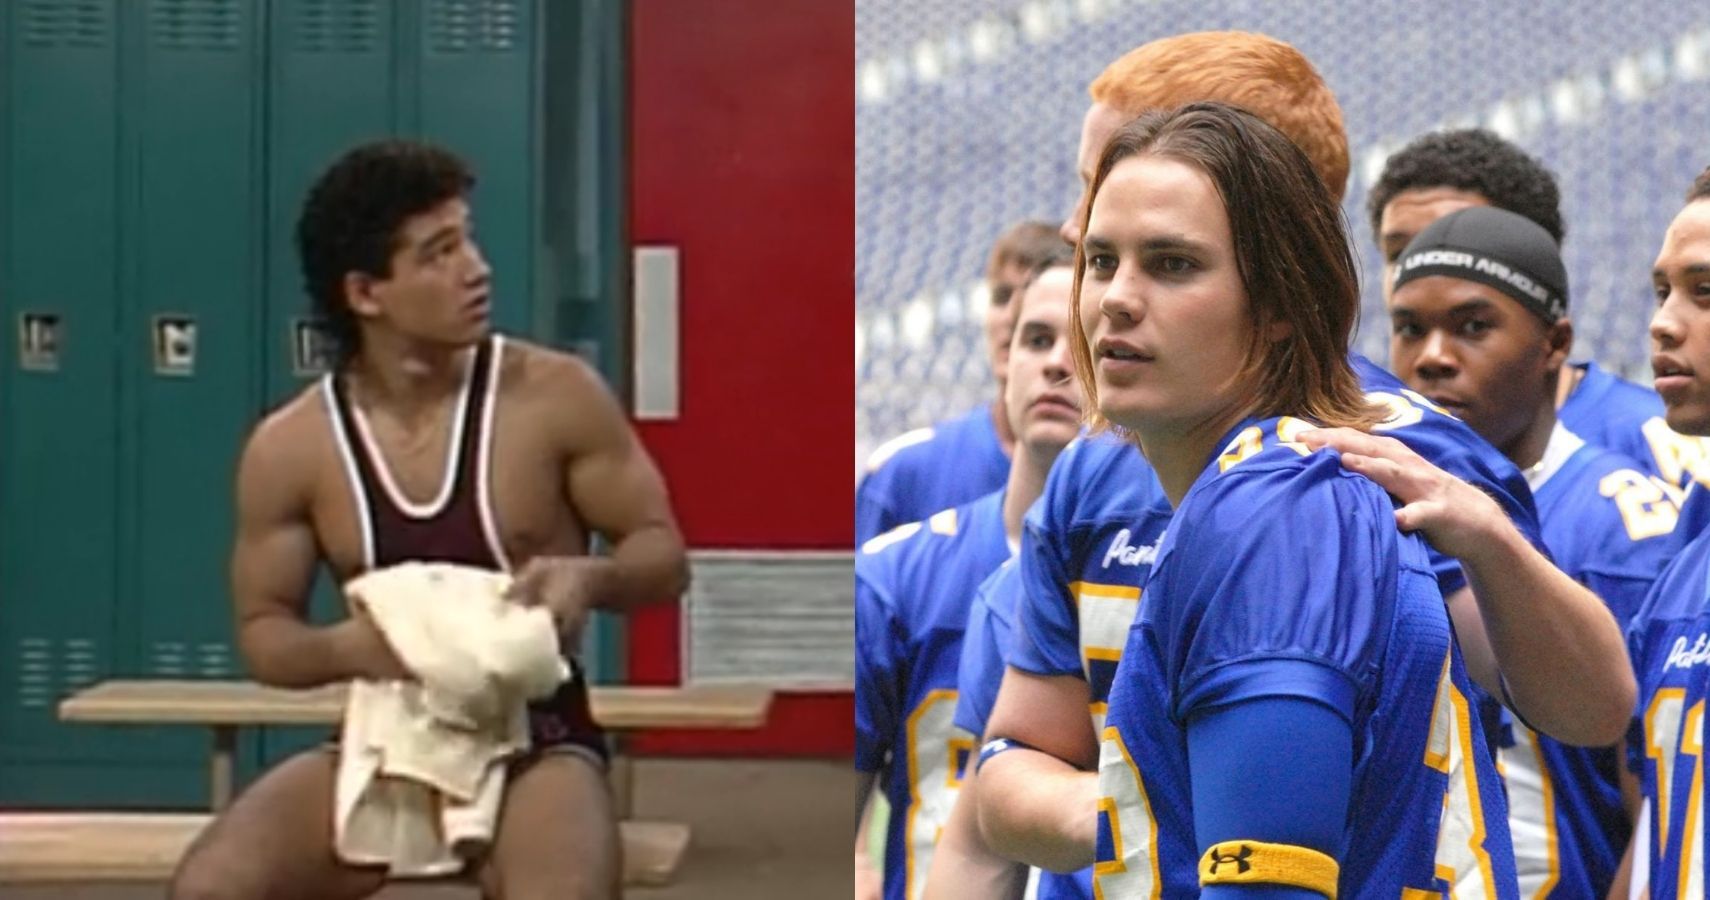 Notable acting roles by athletes in movies/TV - Times Union